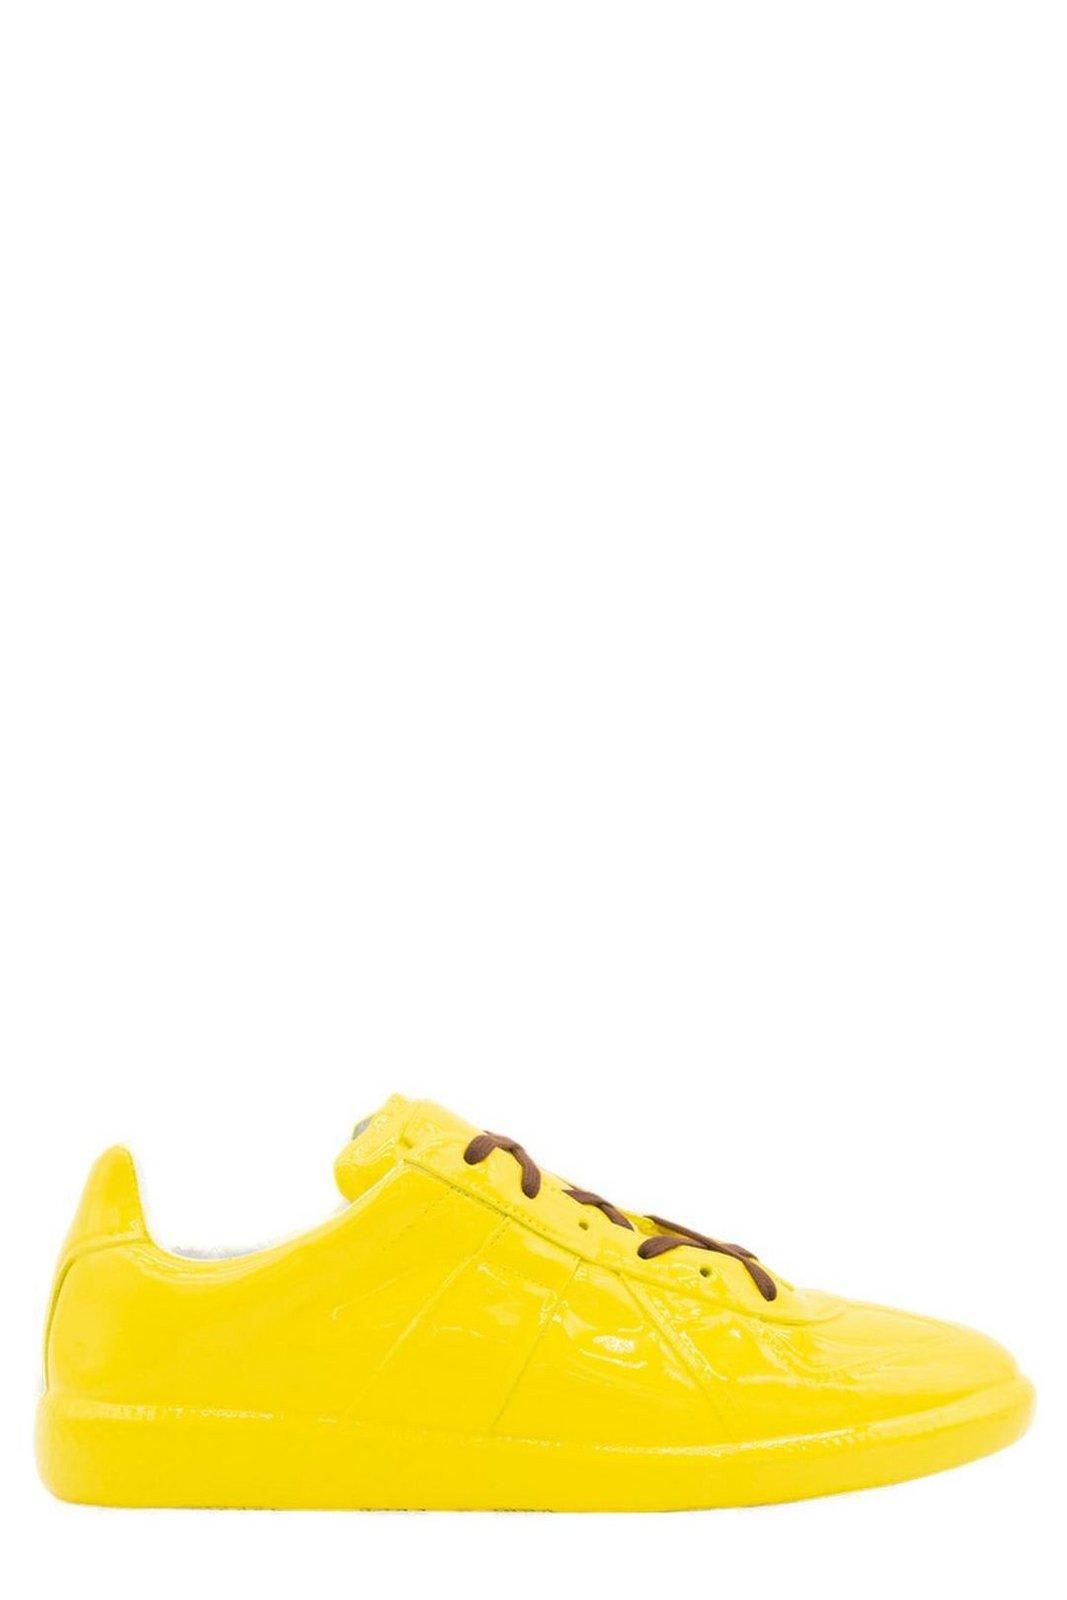 Maison Margiela Replica Lace-up Sneakers In Yellow